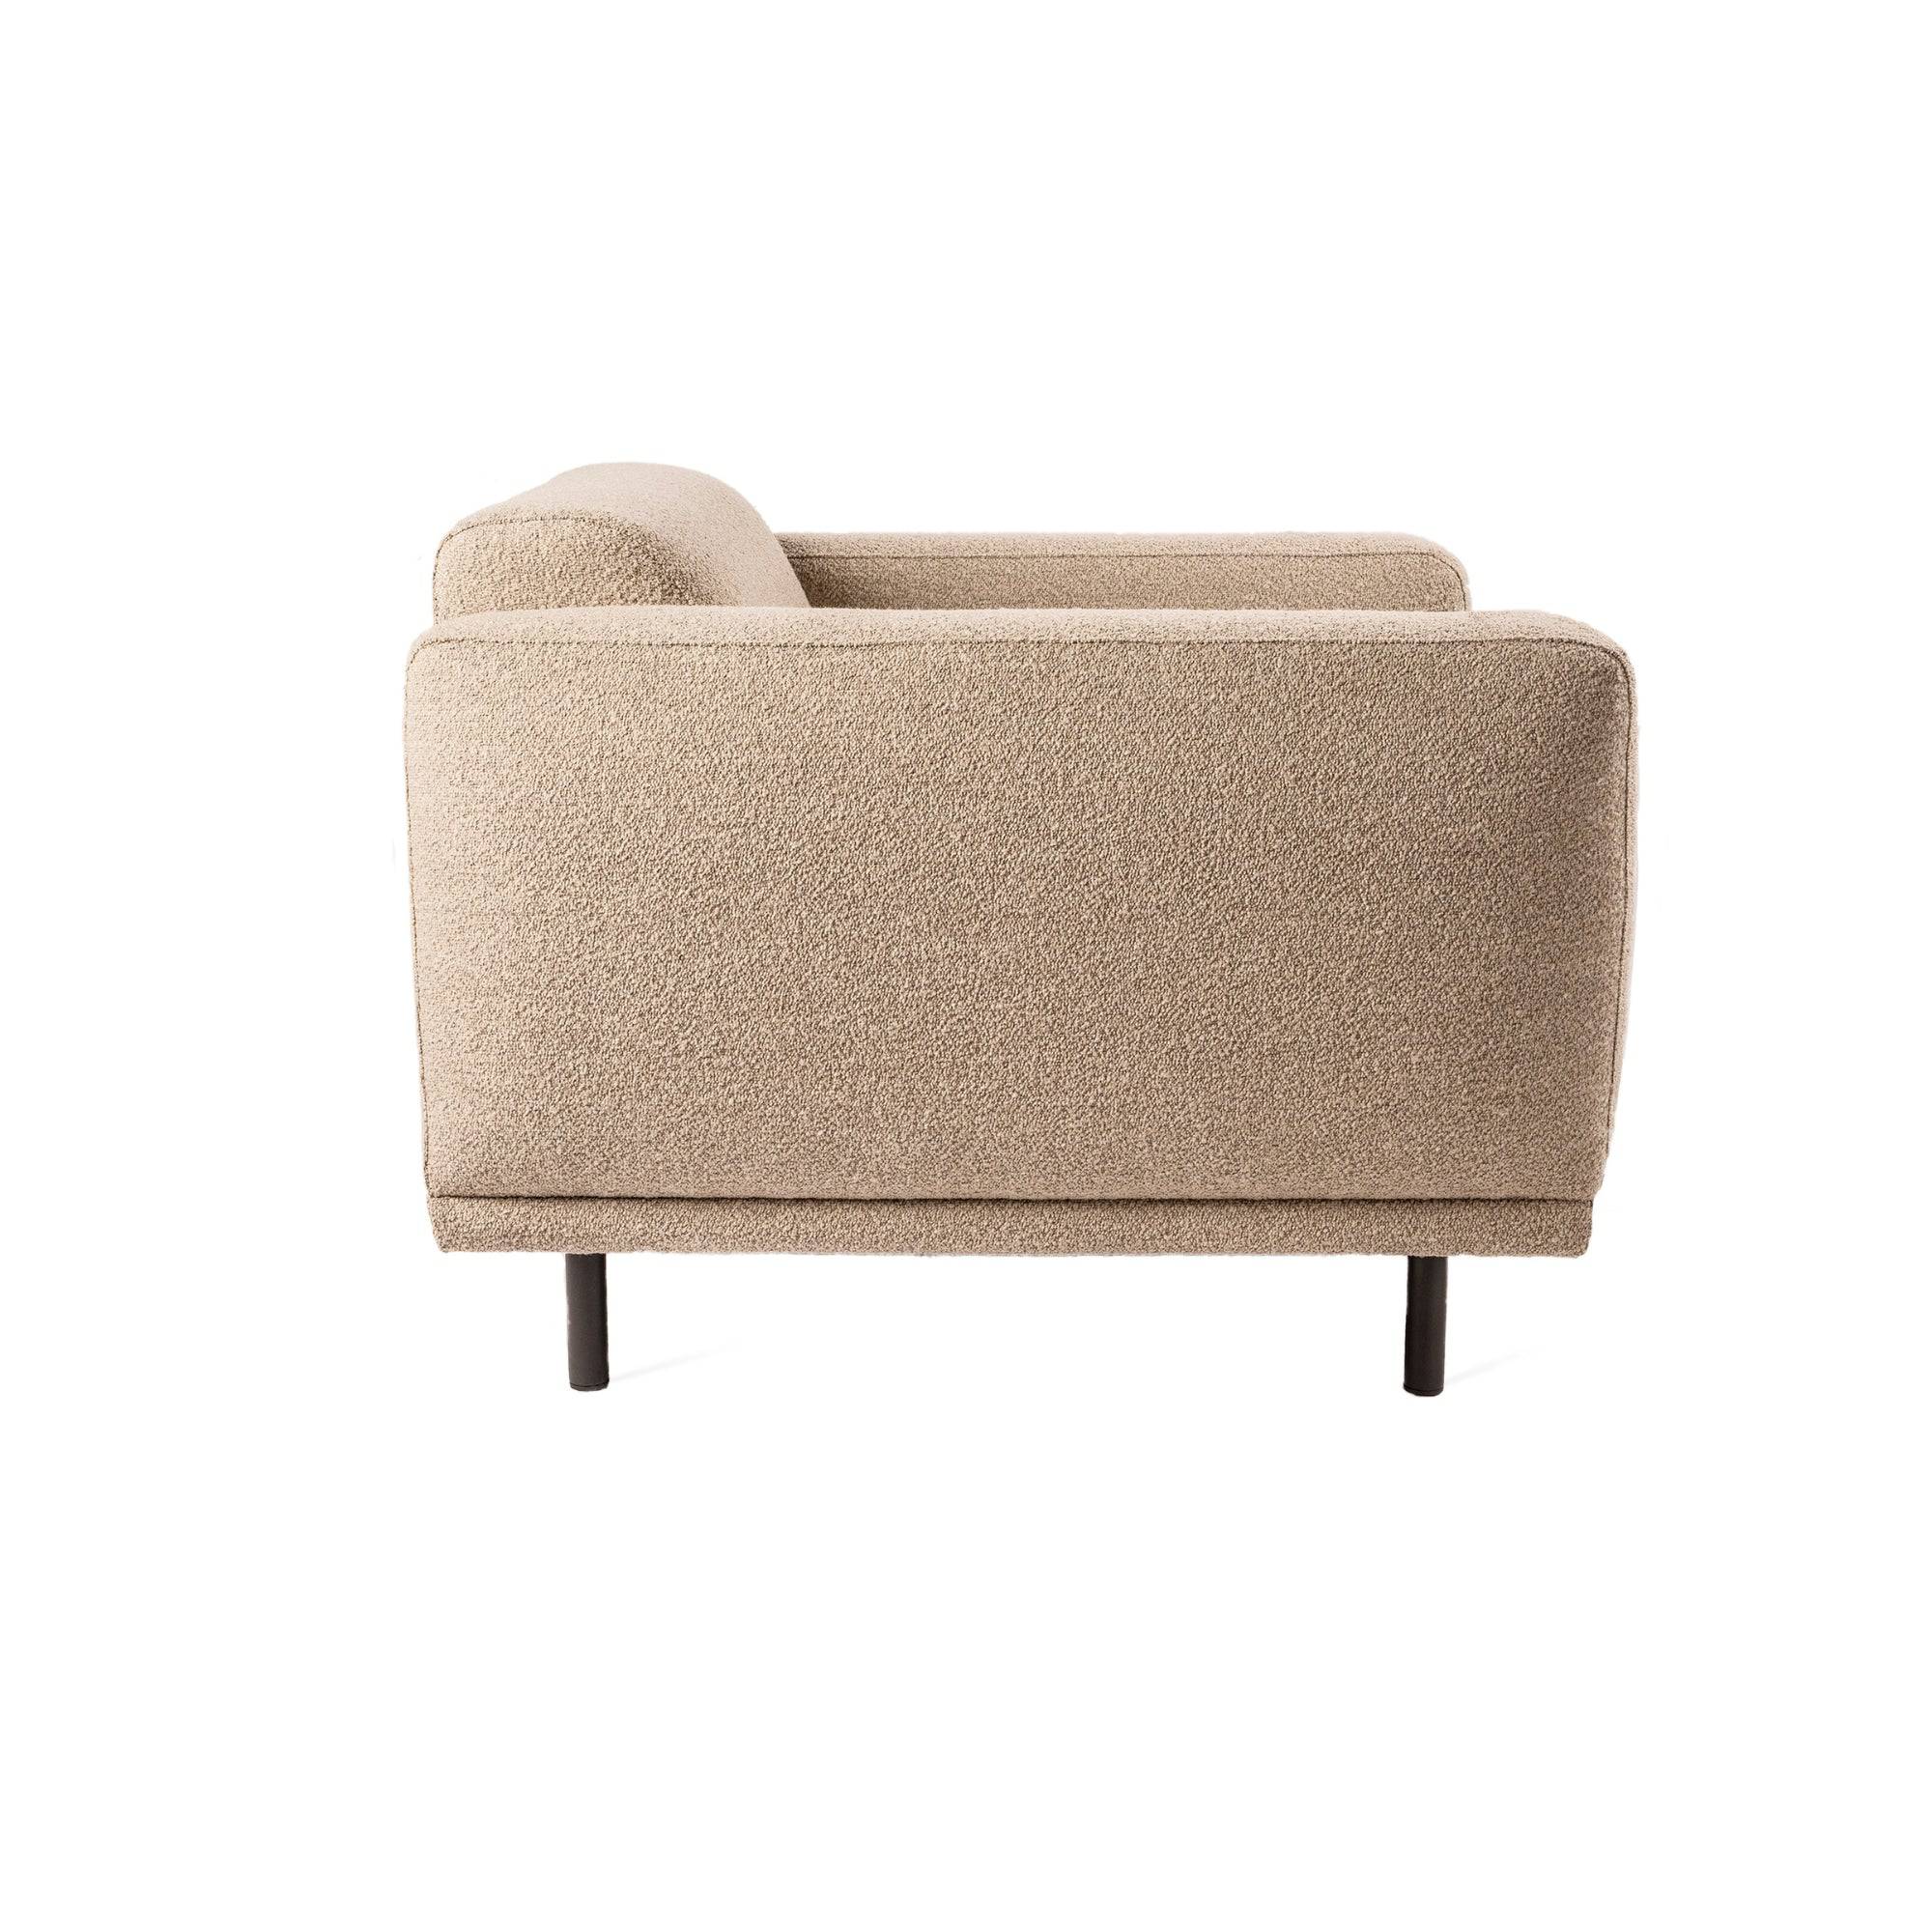 Teddy Lounge Chair - Beige - THAT COOL LIVING